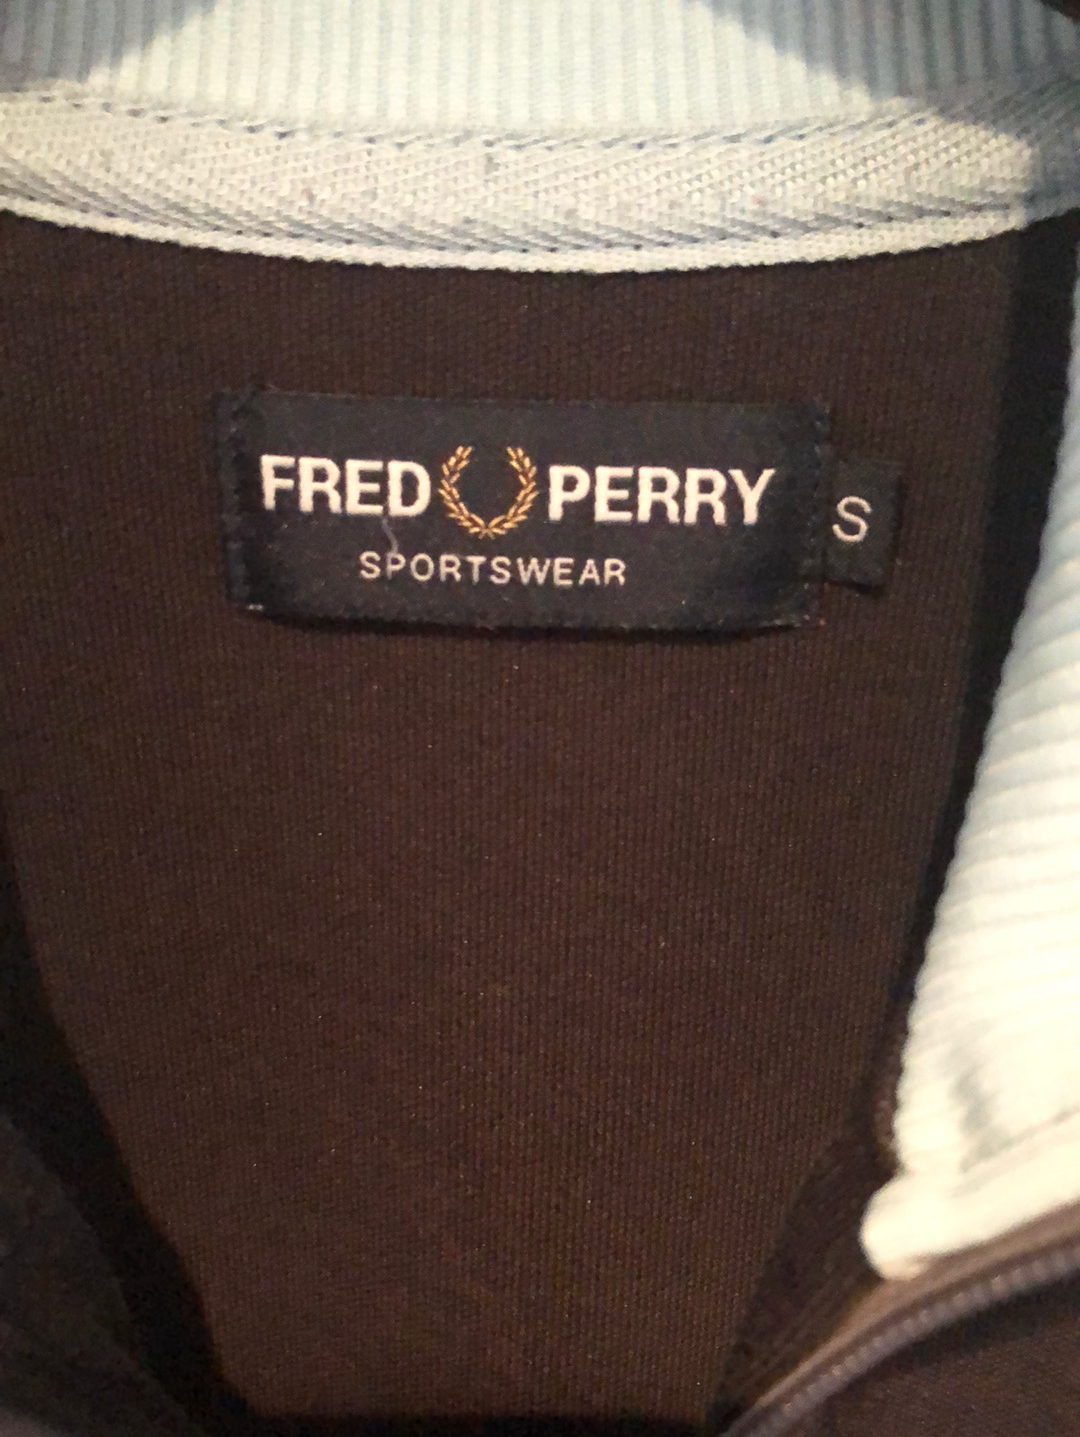 Fred Perry Sportswear Tracksuit Top in Grey with Logo Stripe - Size S